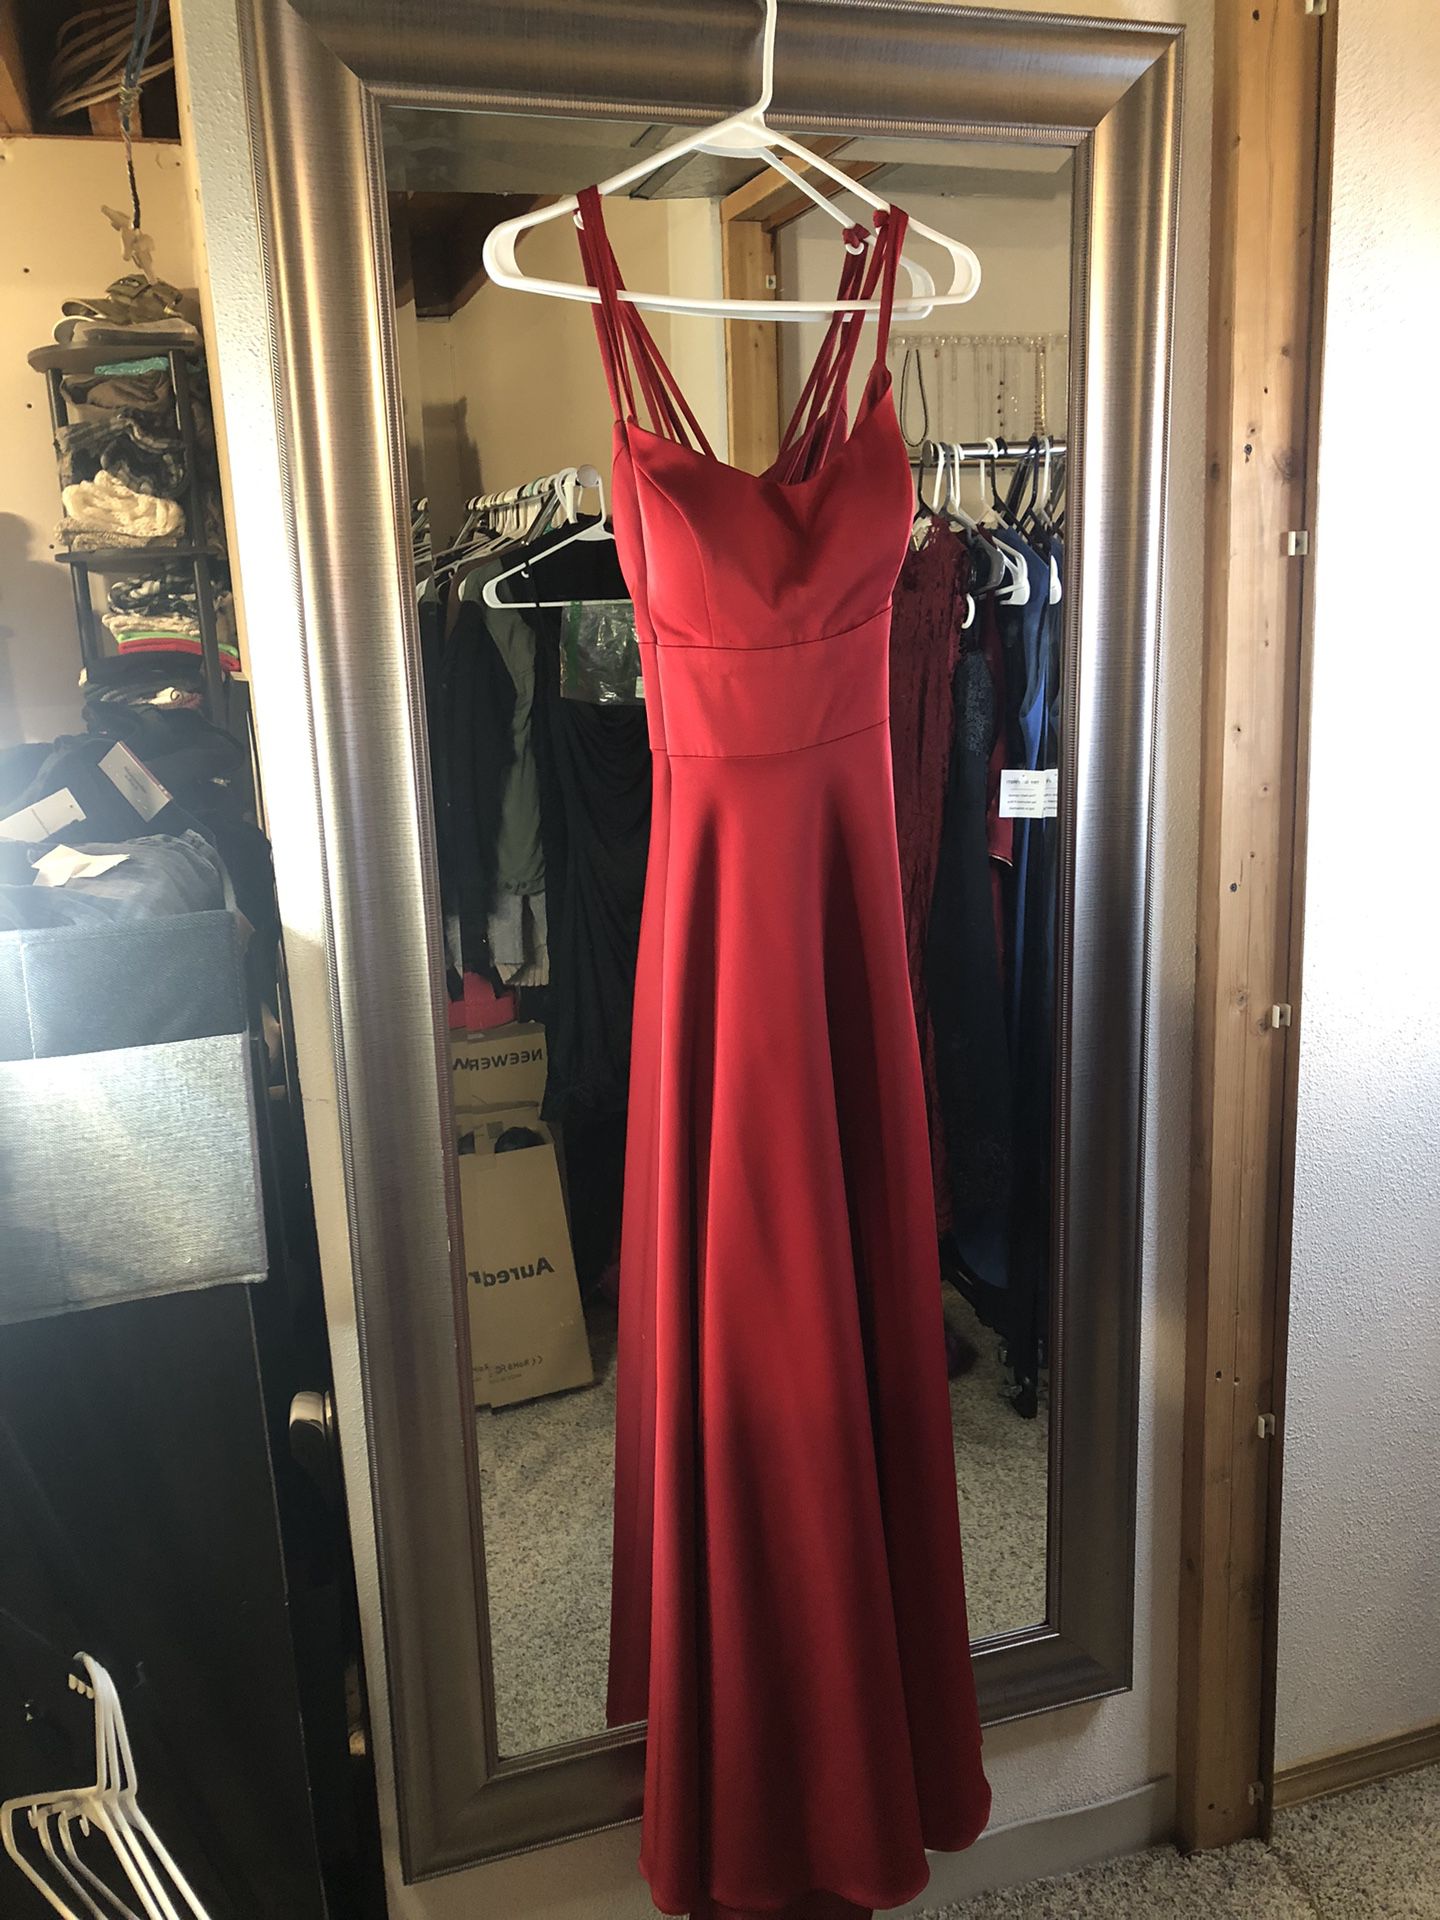 Elegant Red Gown